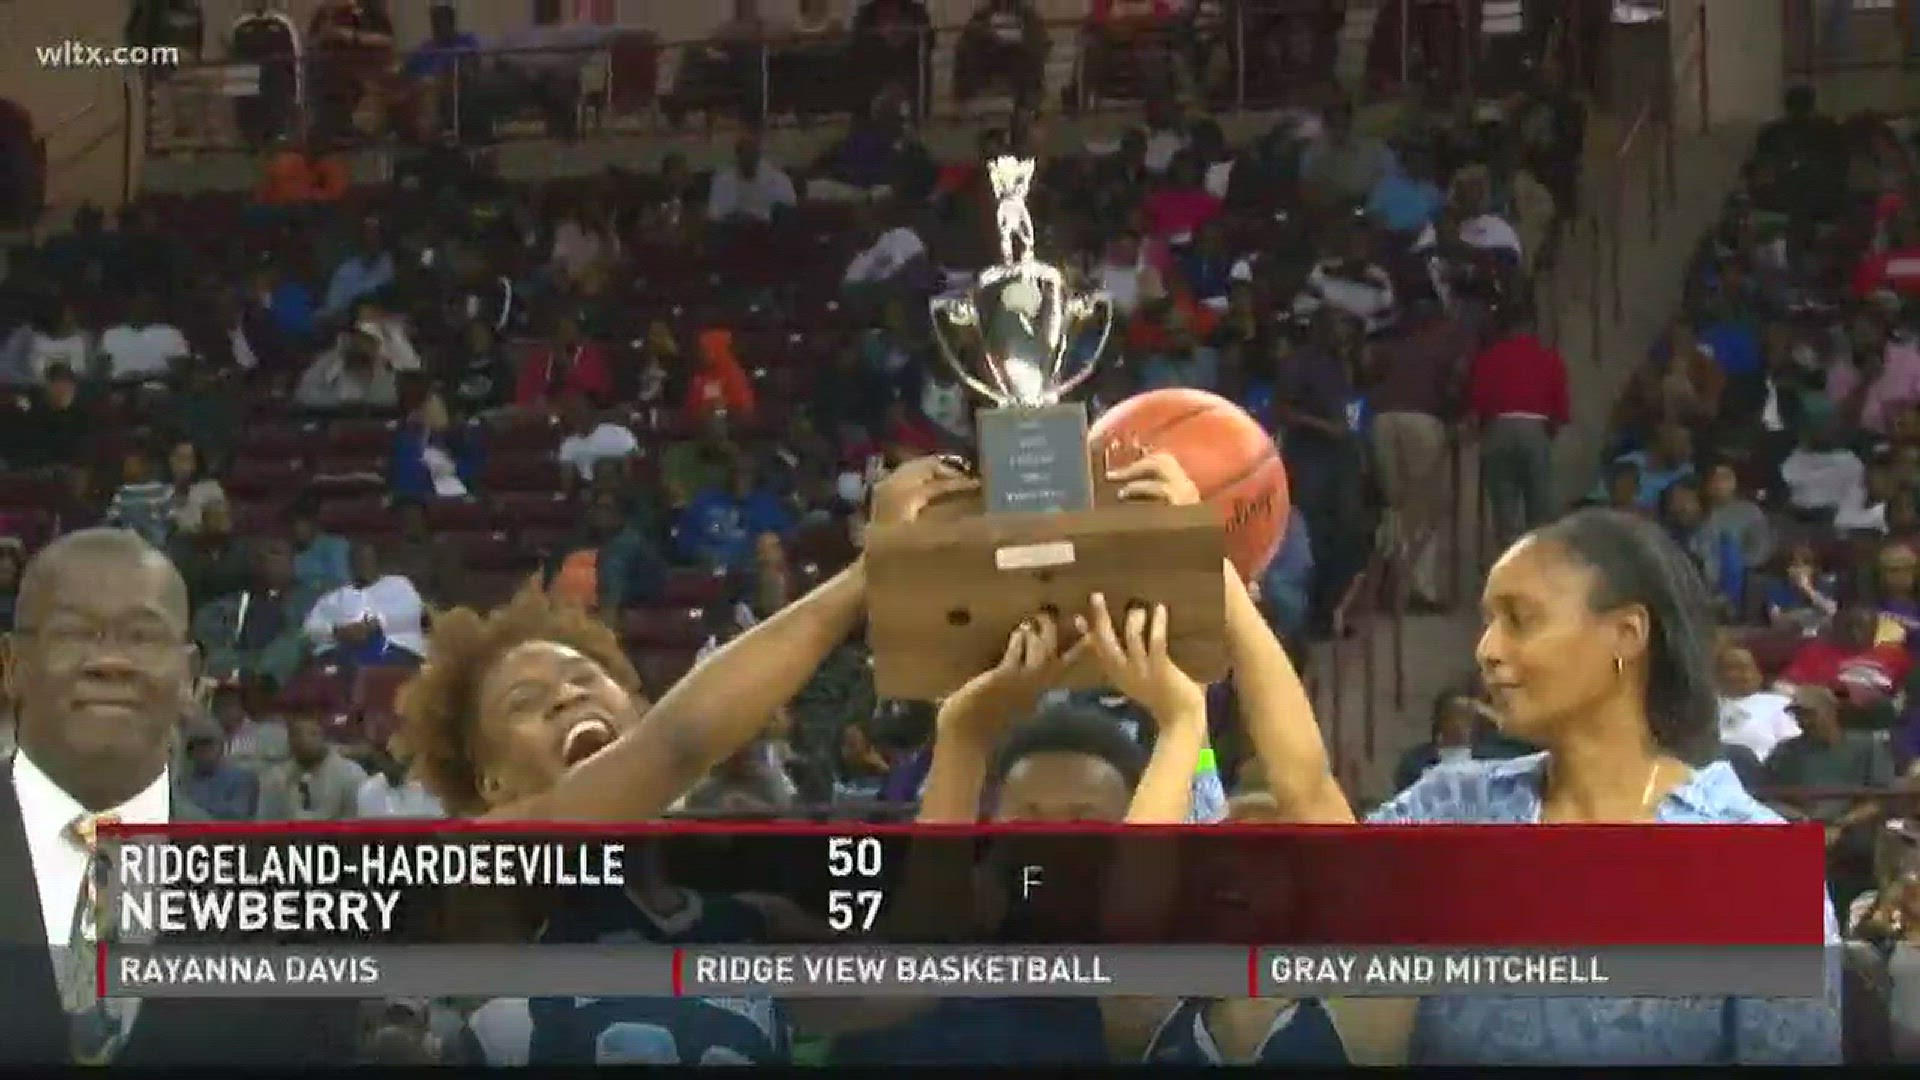 The Newberry Bulldogs defeat Ridgeland-Hardeeville 57-50 to capture their first ever 3A state title in girls basketball. They also win it for their senior Rayanna Davis who couldn't play in the championship game due to a recent car accident.